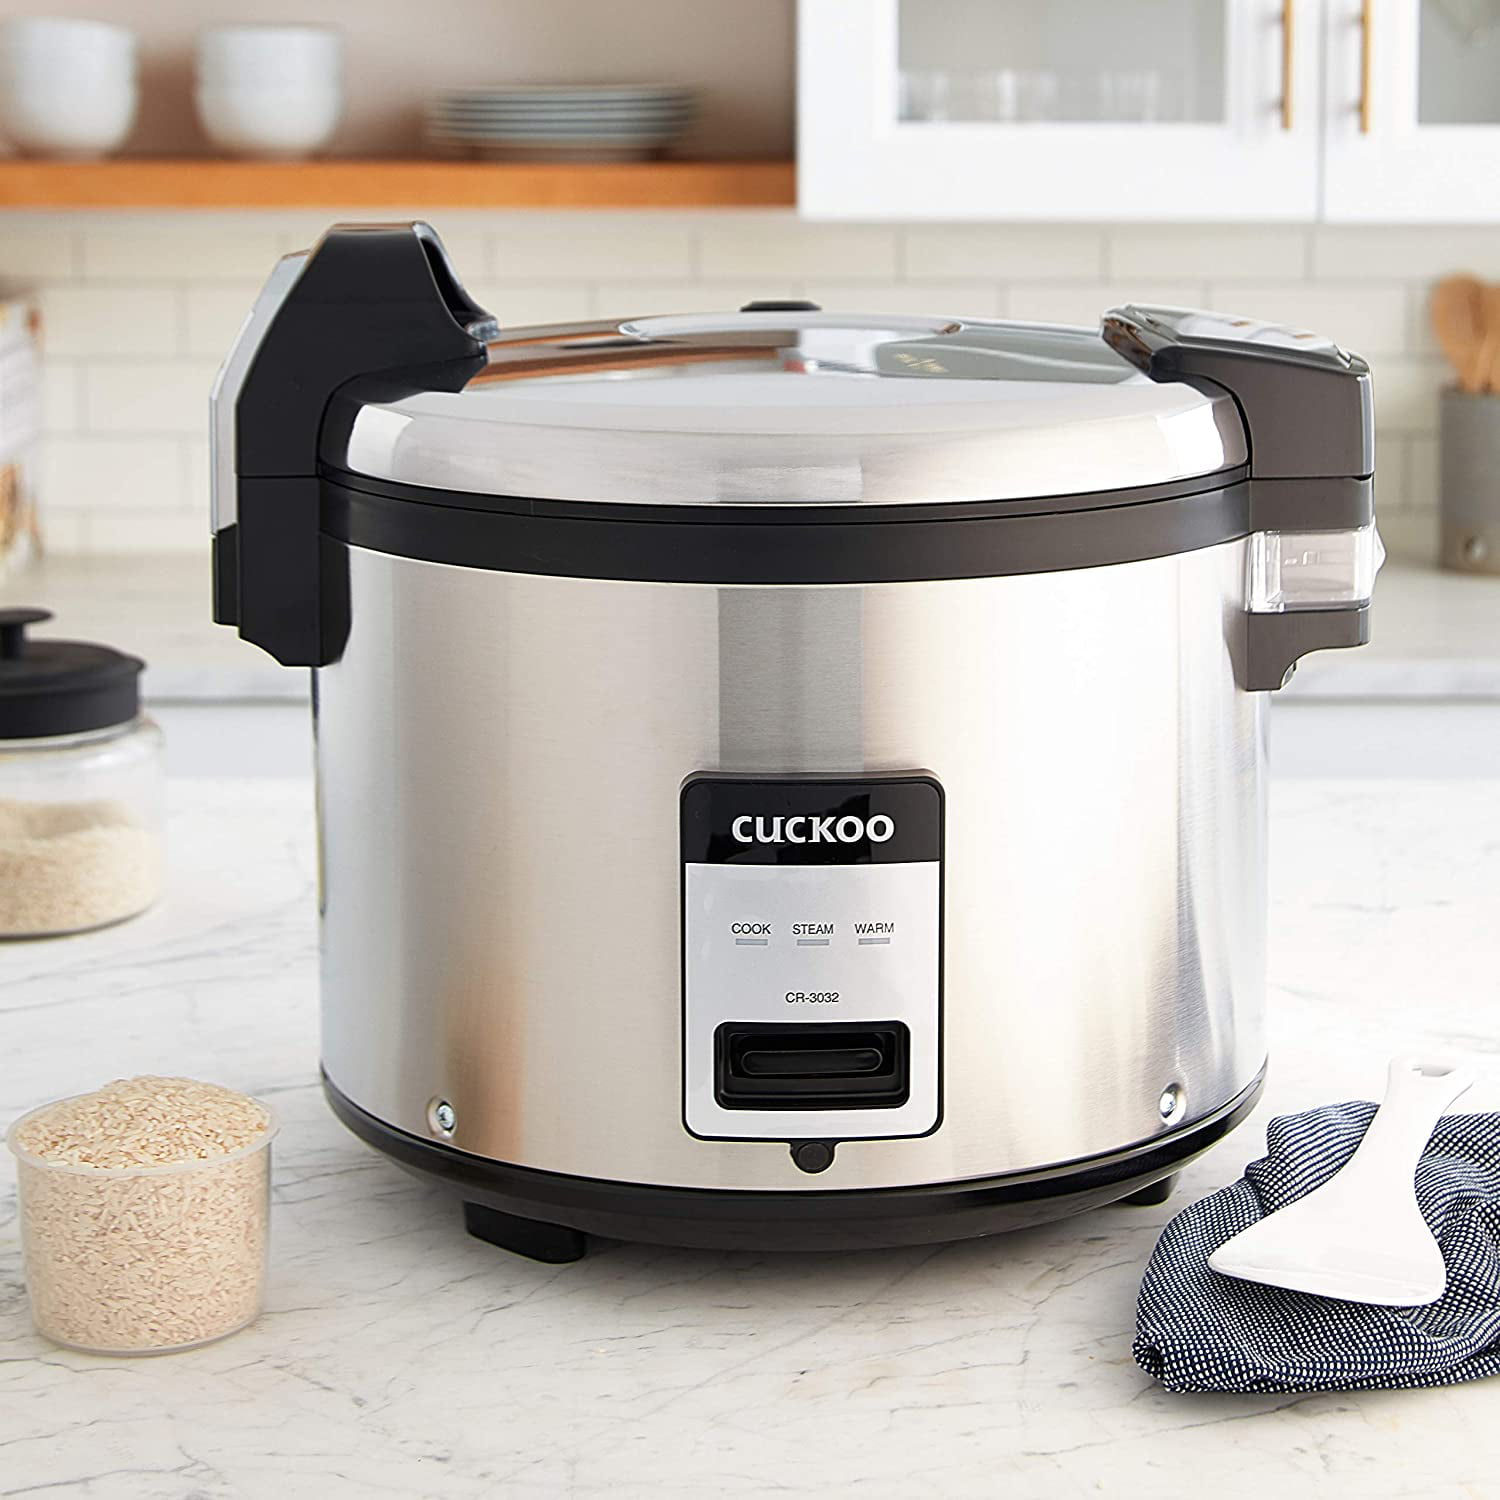 Cuckoo Rice Cooker 30 Cup for Sale in Los Angeles, CA - OfferUp